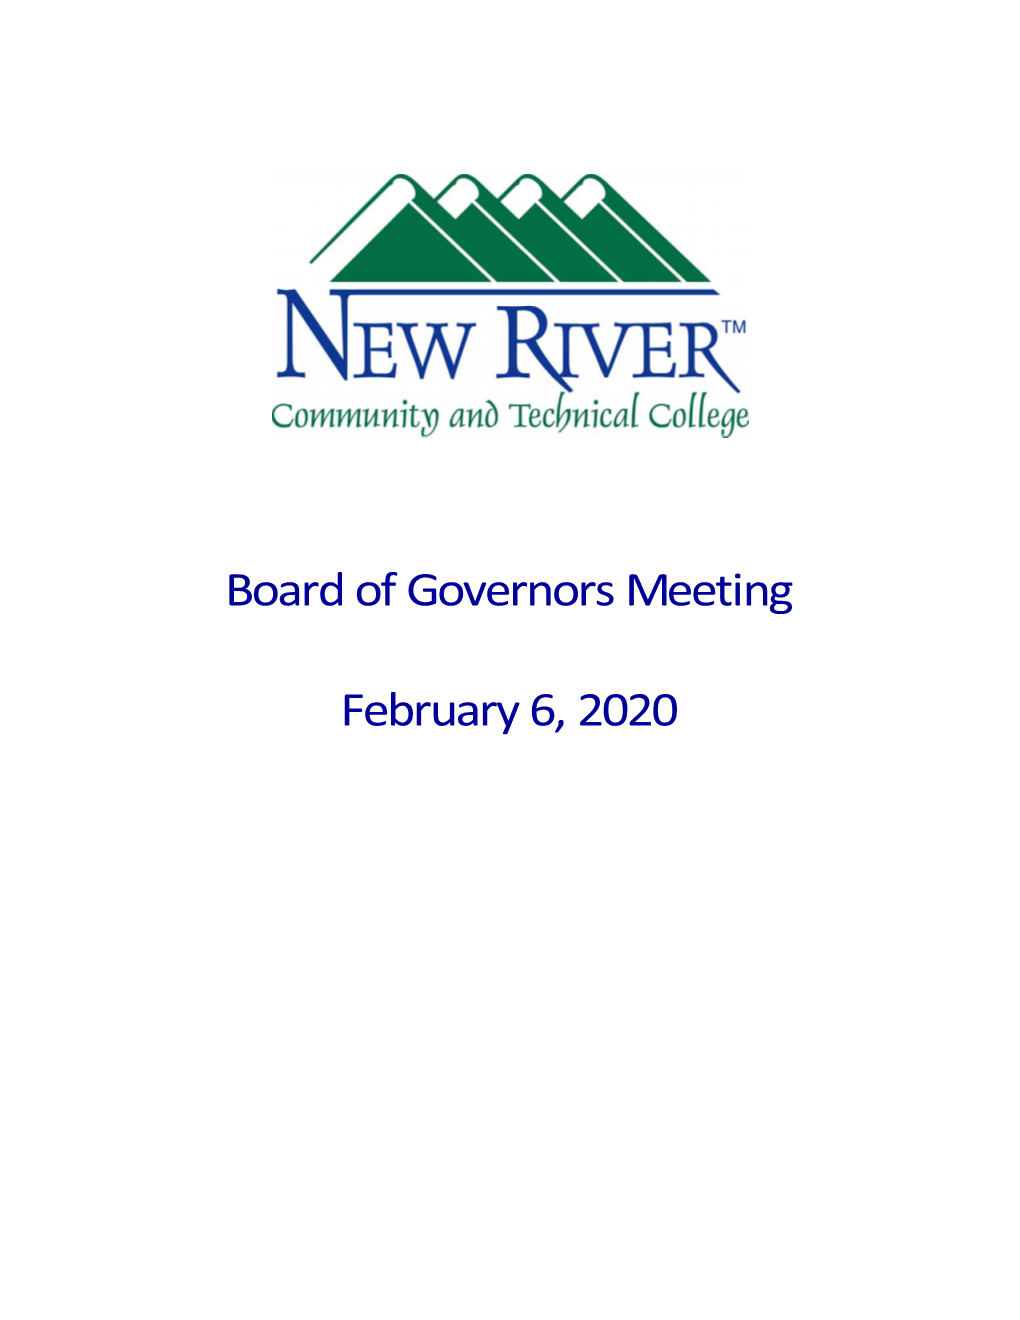 Board of Governors Packet February 6, 2020